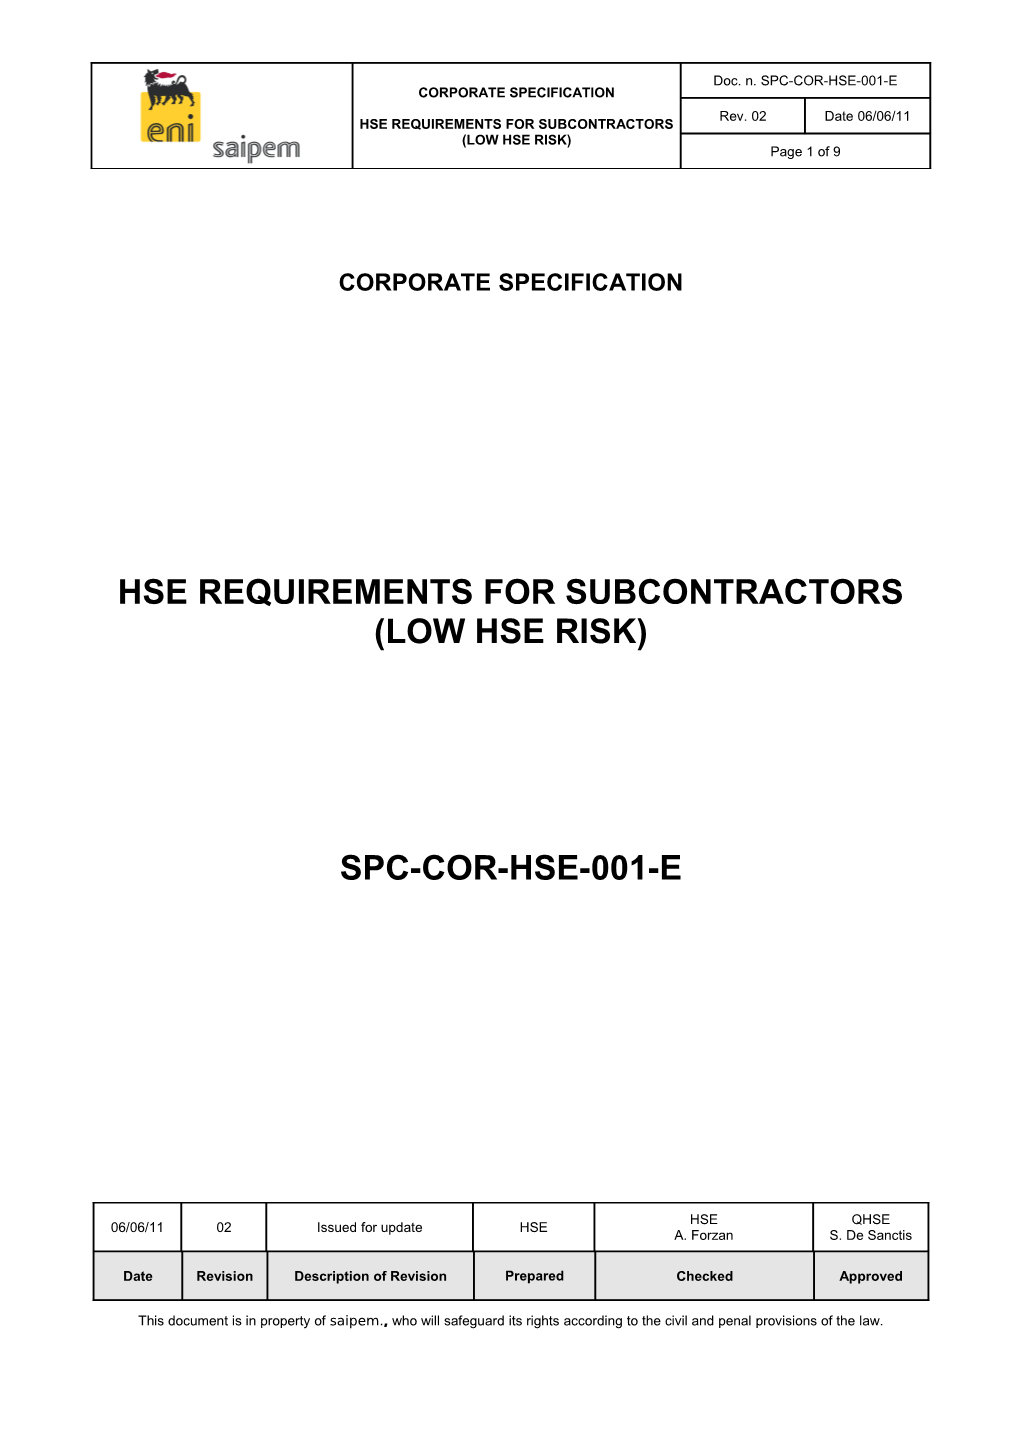 HSE Requirements for Subcontractors (Low HSE Risk)